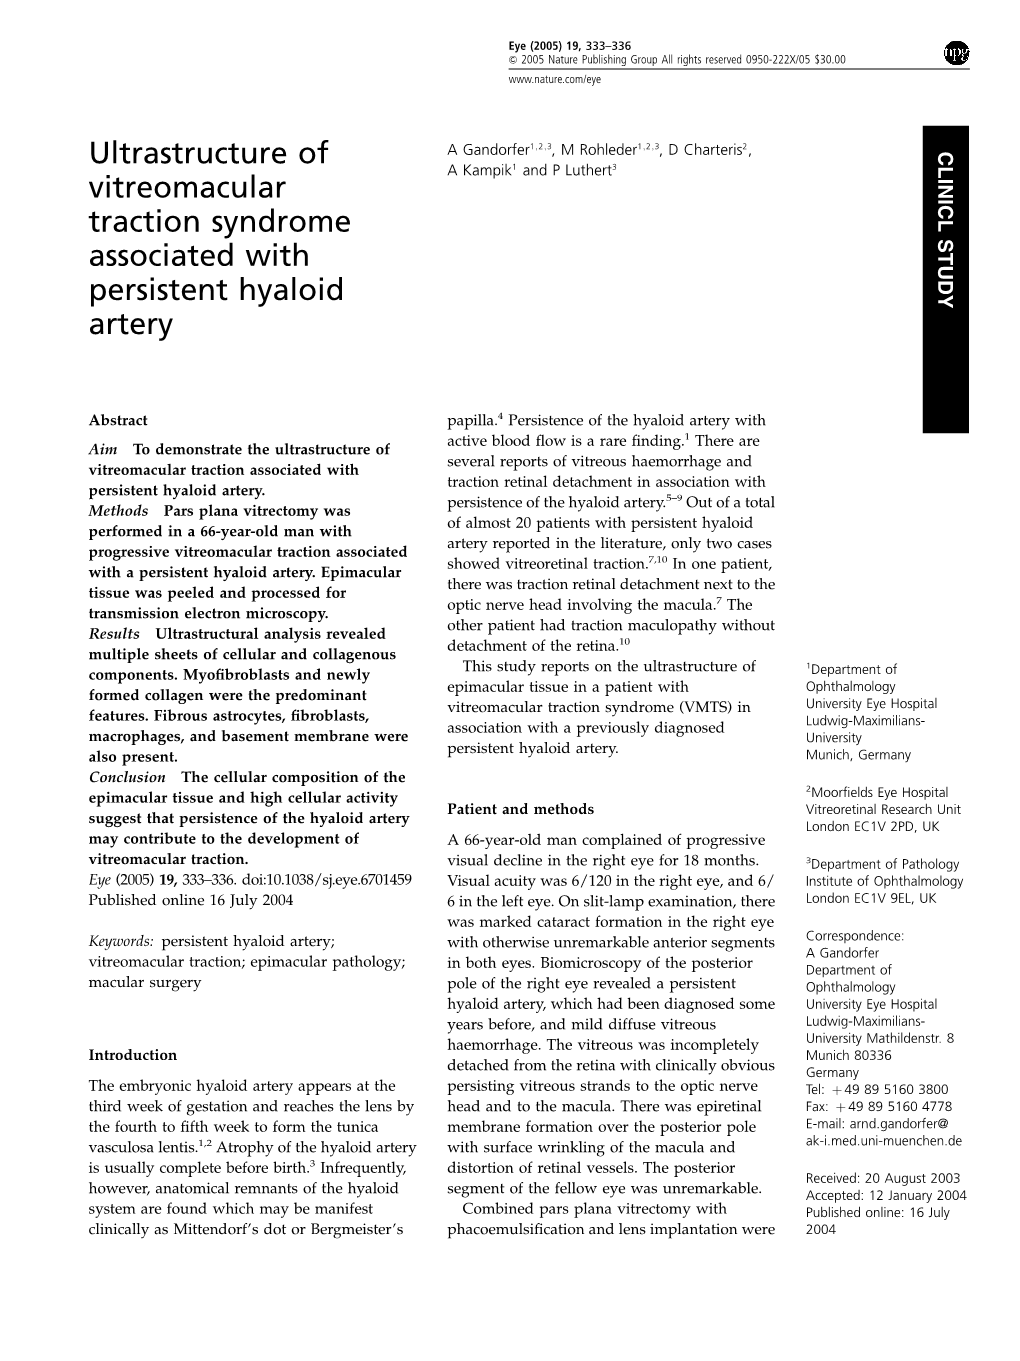 Ultrastructure of Vitreomacular Traction Syndrome Associated With